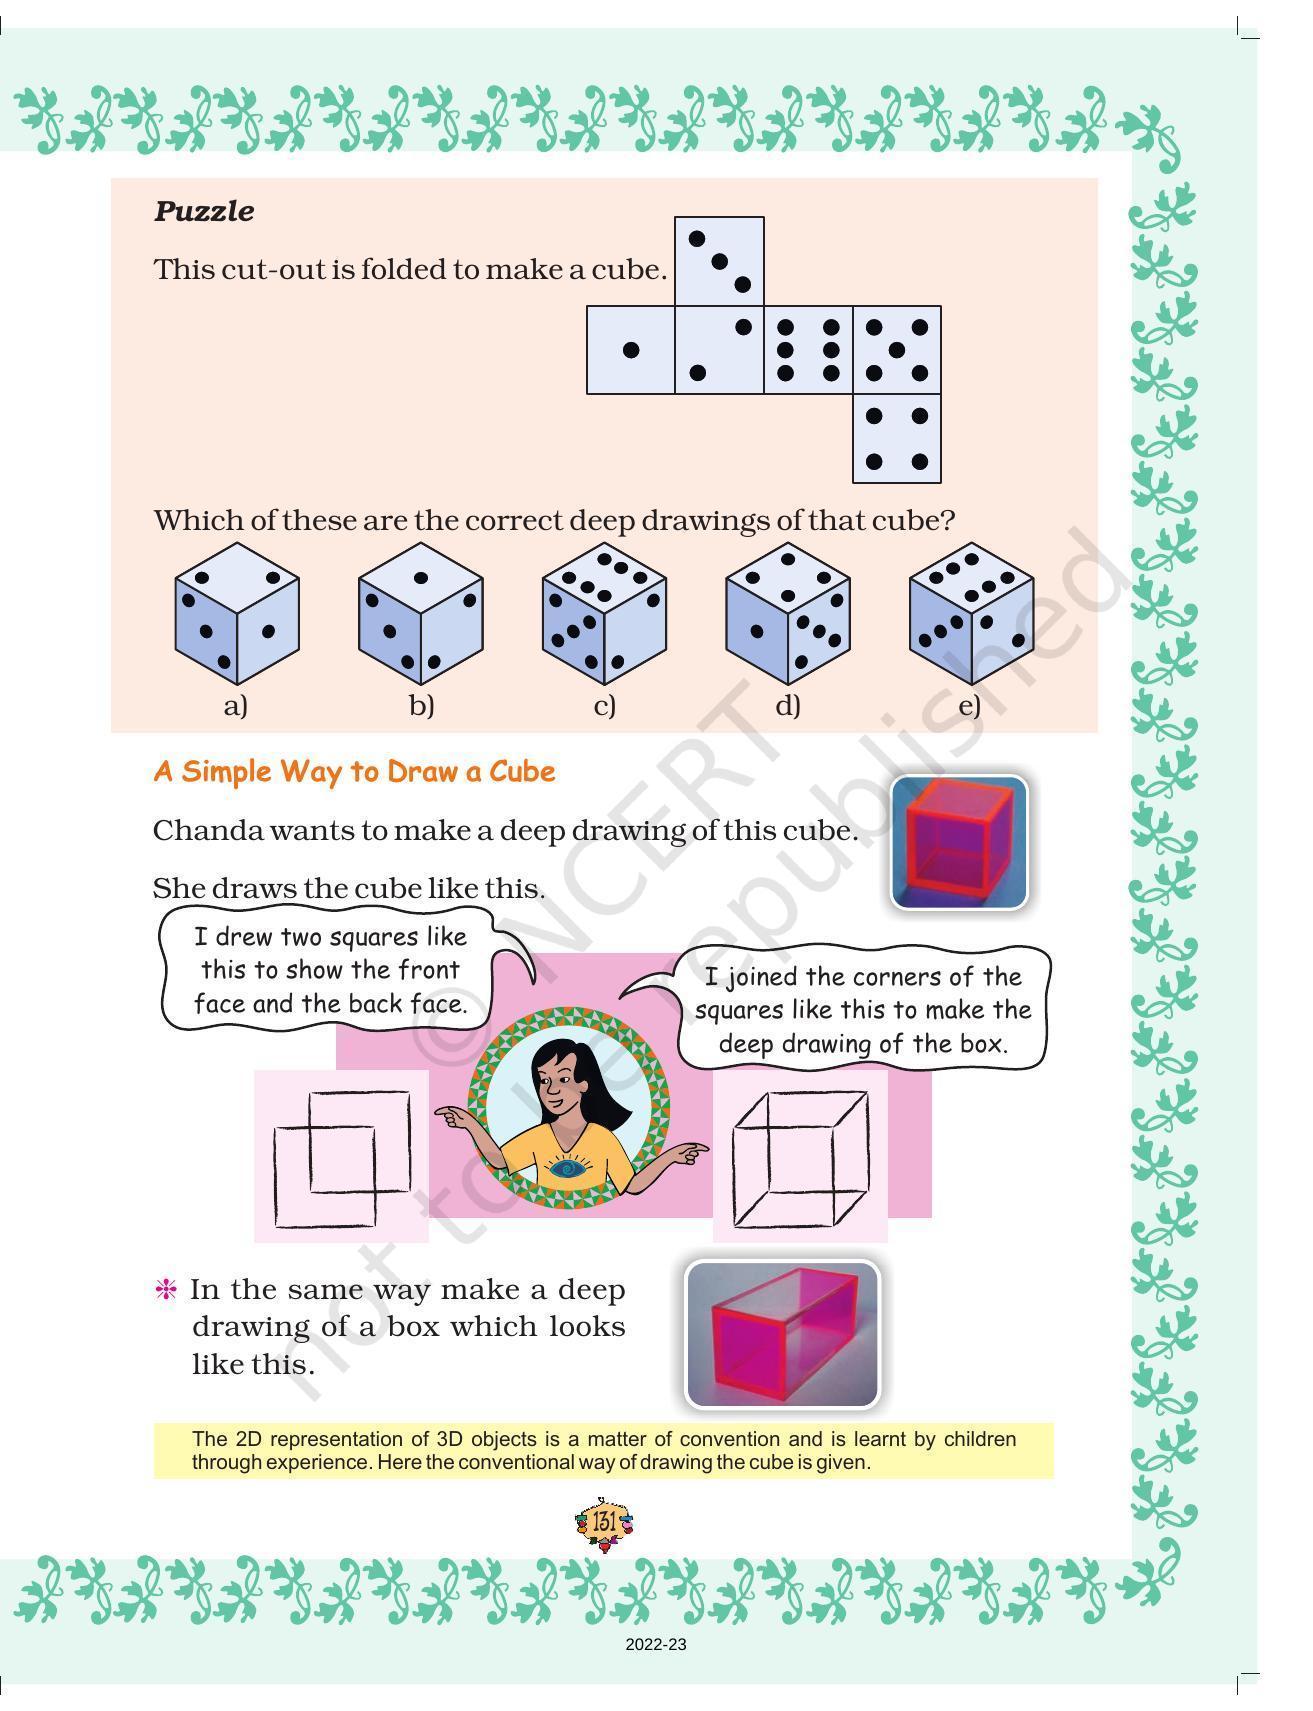 NCERT Book for Class 5 Maths Chapter 9 Boxes and Sketches - Page 6